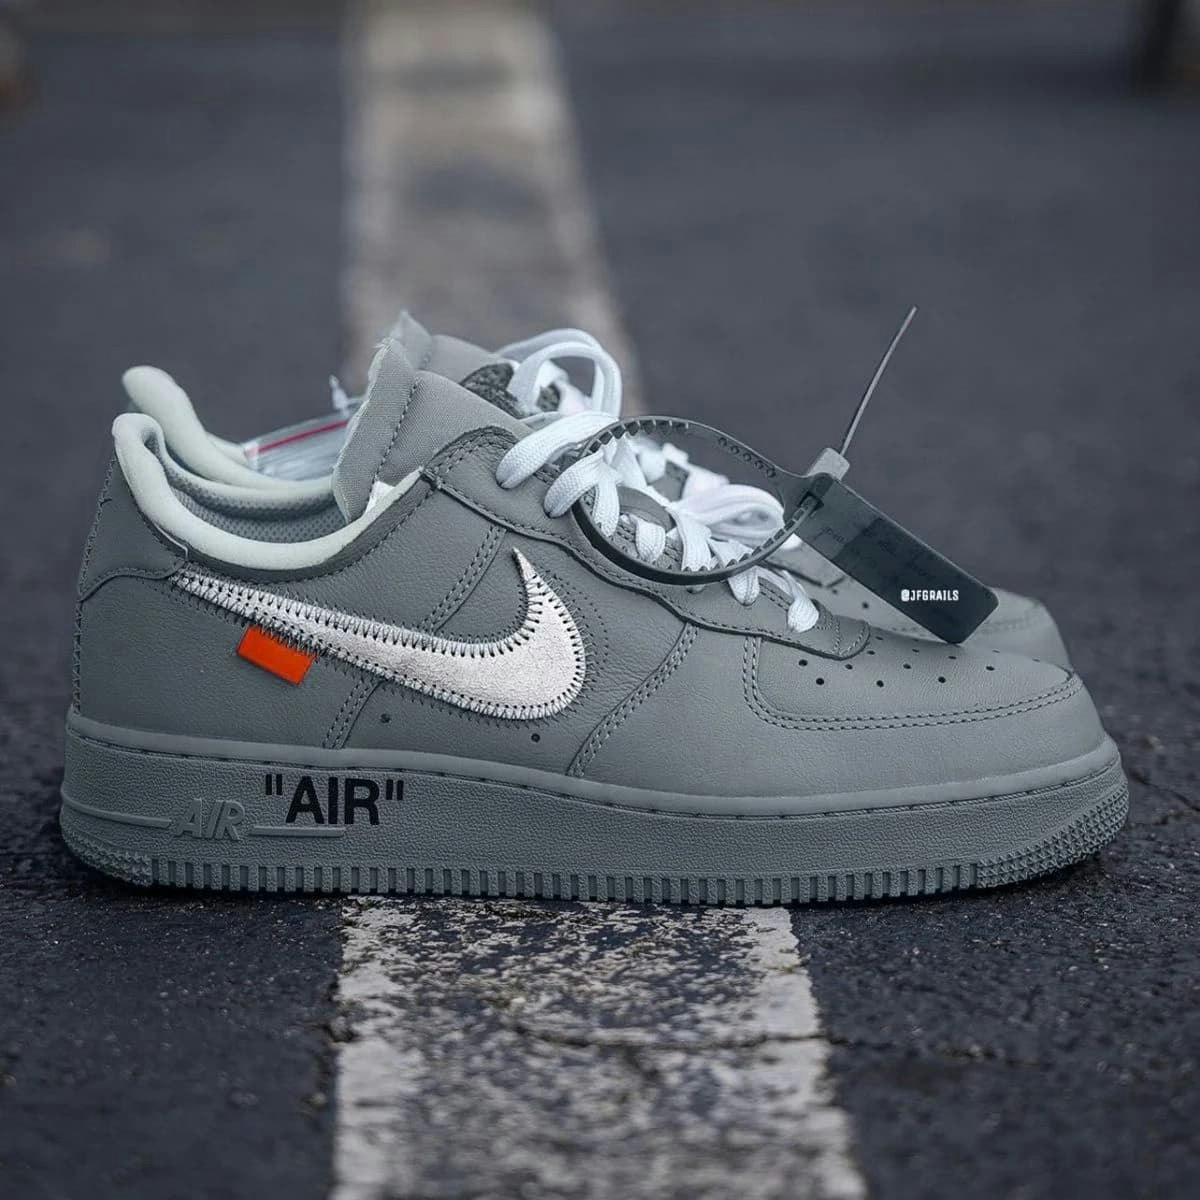 Off-White x Nike Air Force 1 Low "Ghost Grey" 